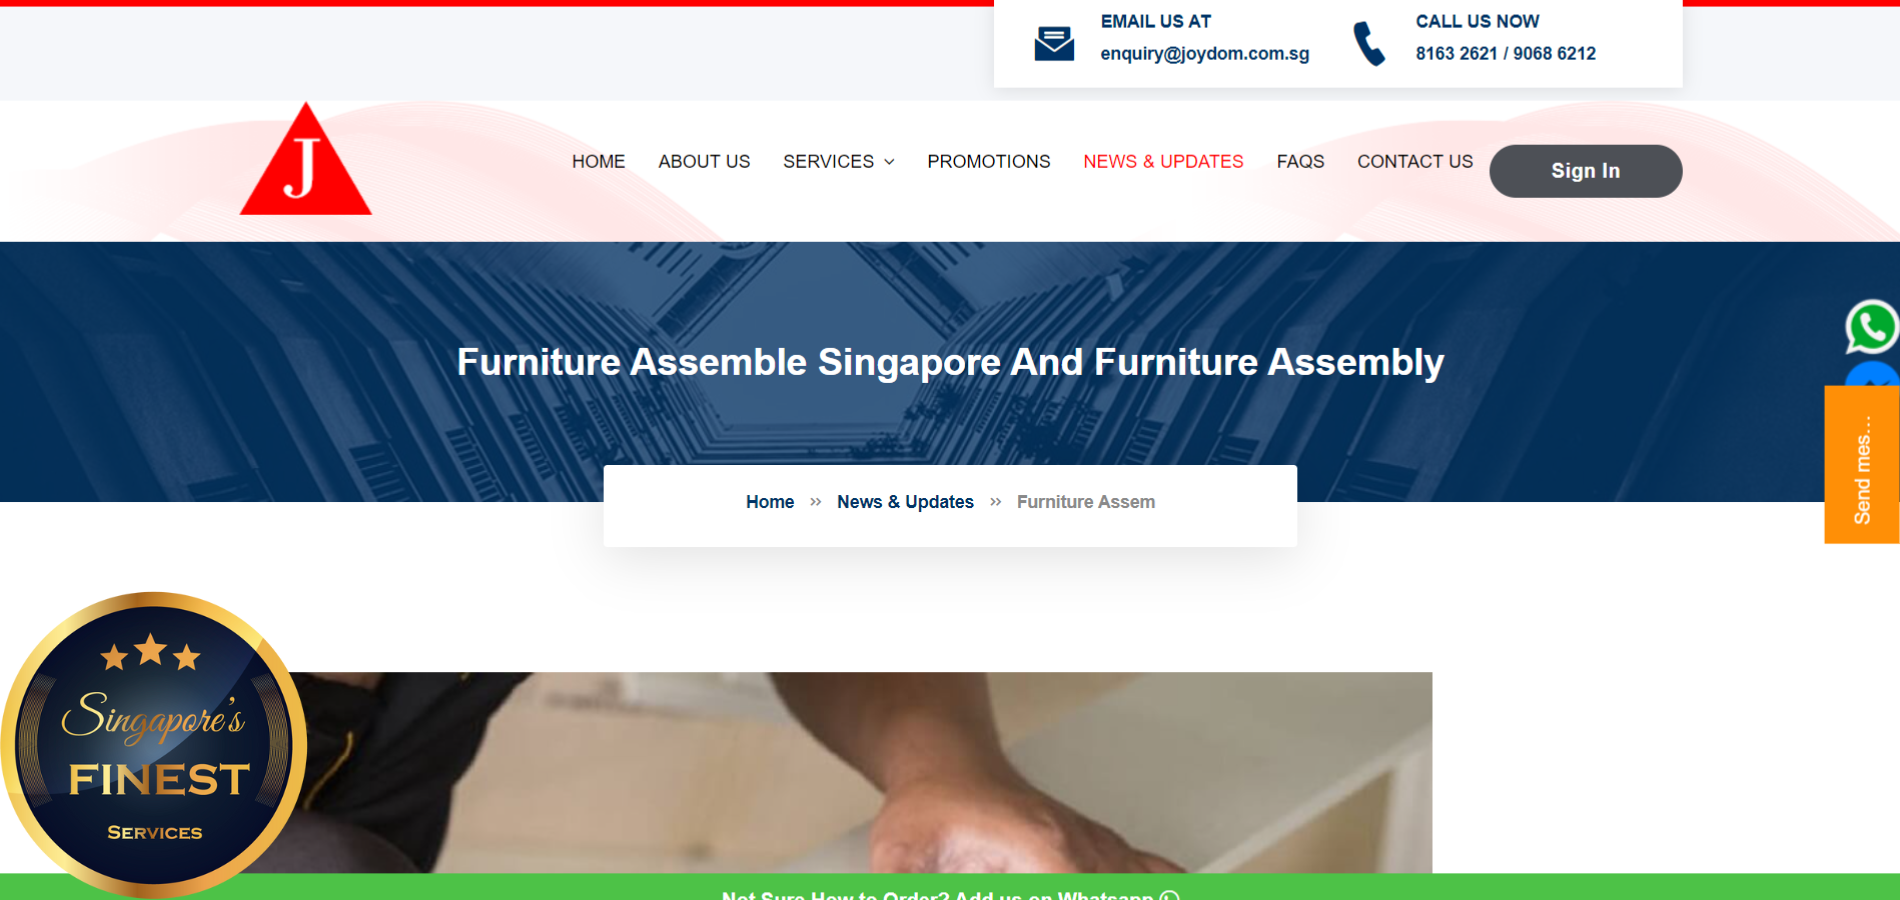 The Finest Furniture Assembly Services in Singapore